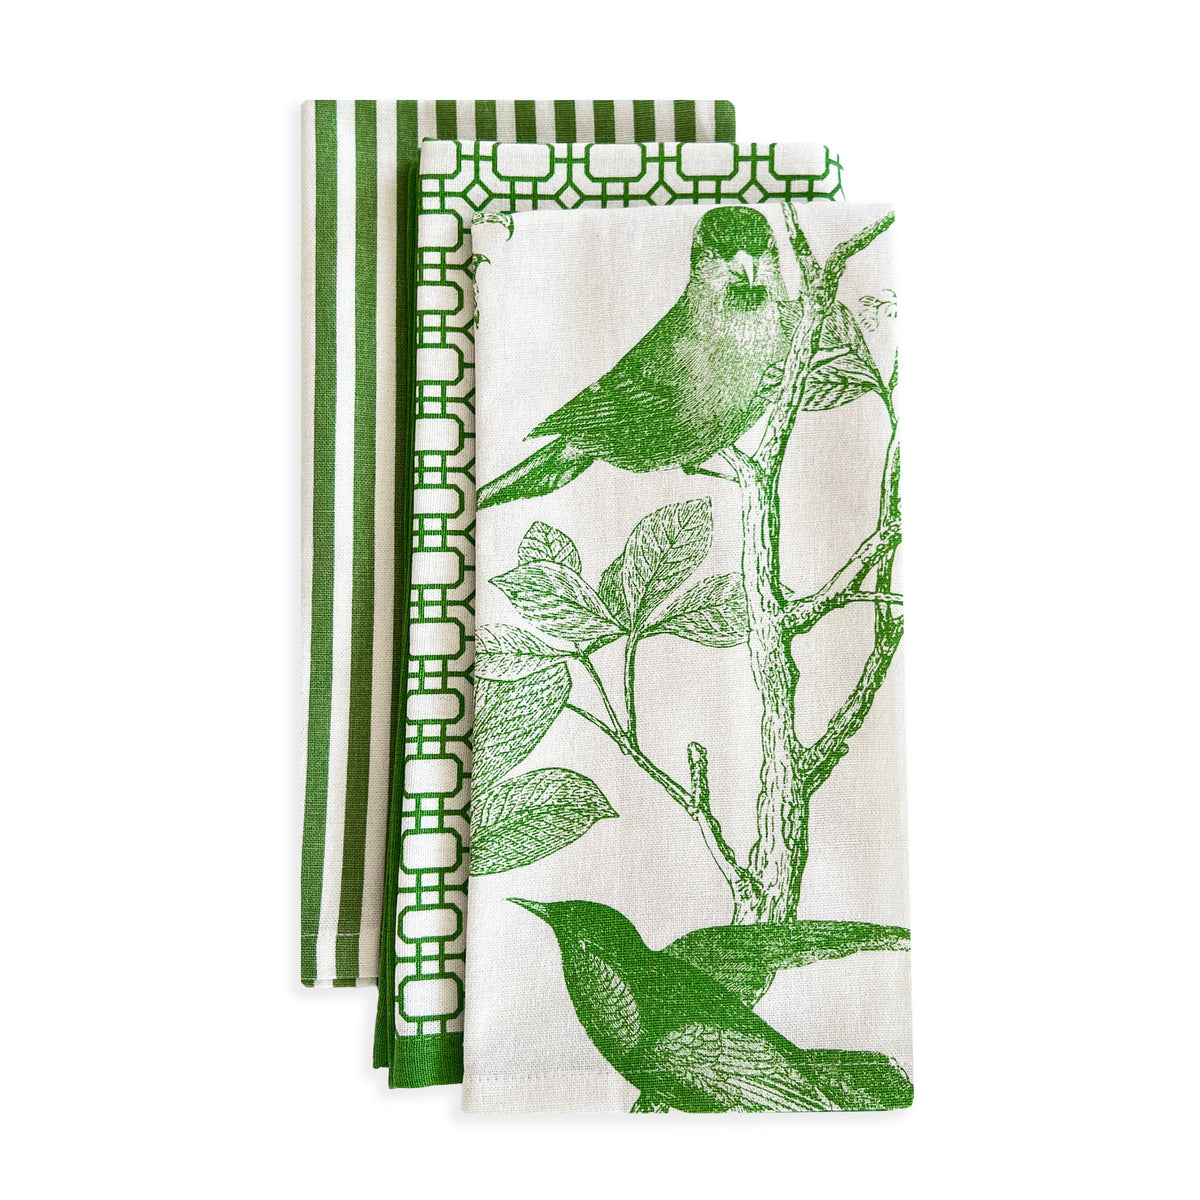 A Pinstripe Dinner Napkin in Green Set/4 with a hummingbird on it by Caskata.